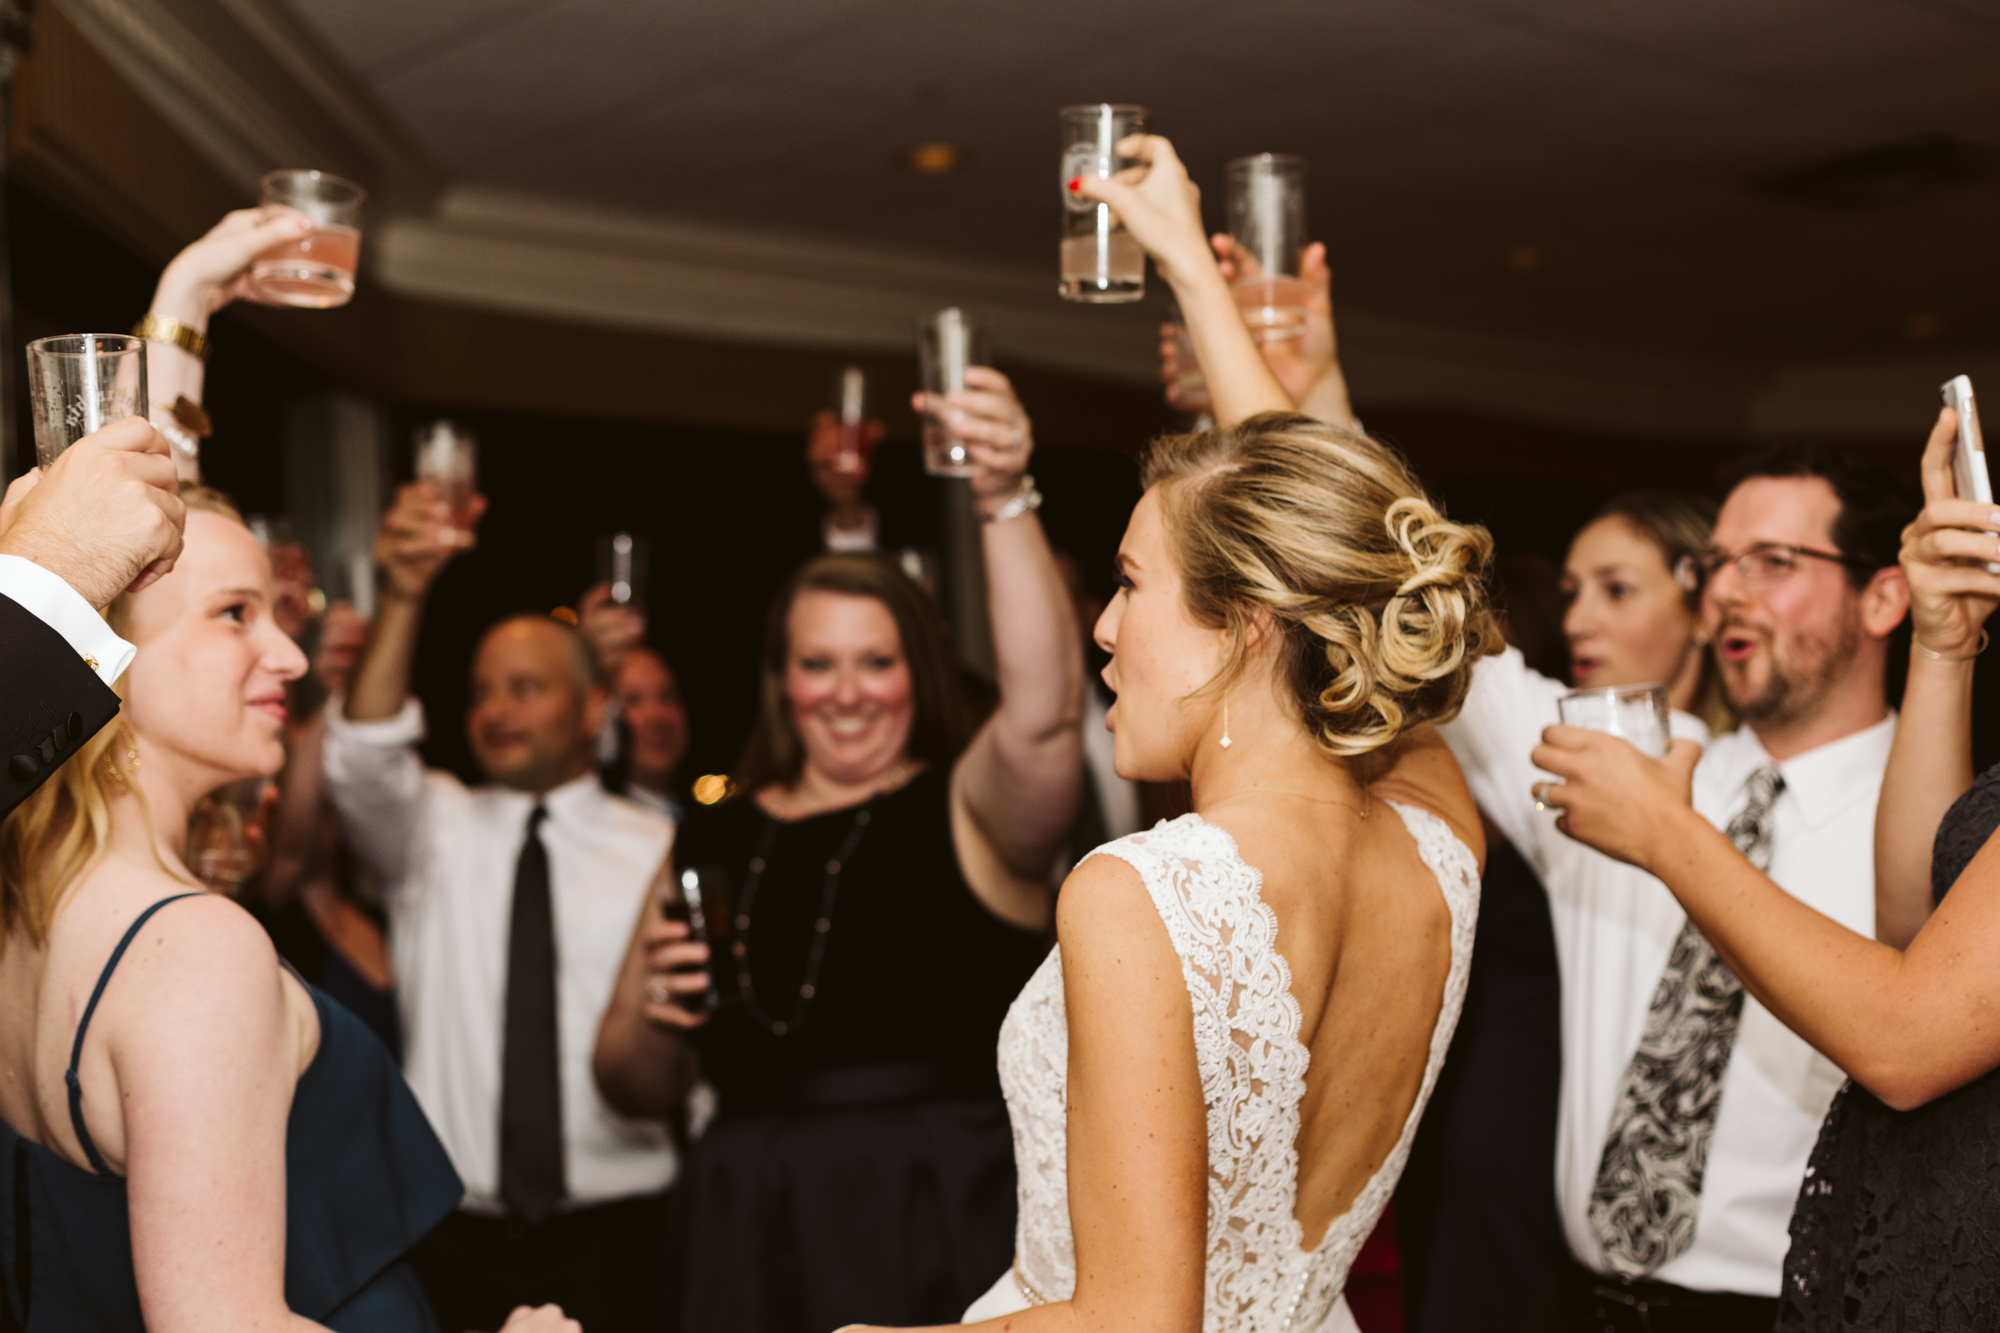 Elegant, Columbia Country Club, Chevy Chase Maryland, Baltimore Wedding Photographer, Classic, Traditional, Family Doing a Shot During Reception, Raising a Glass, Bride Toasting